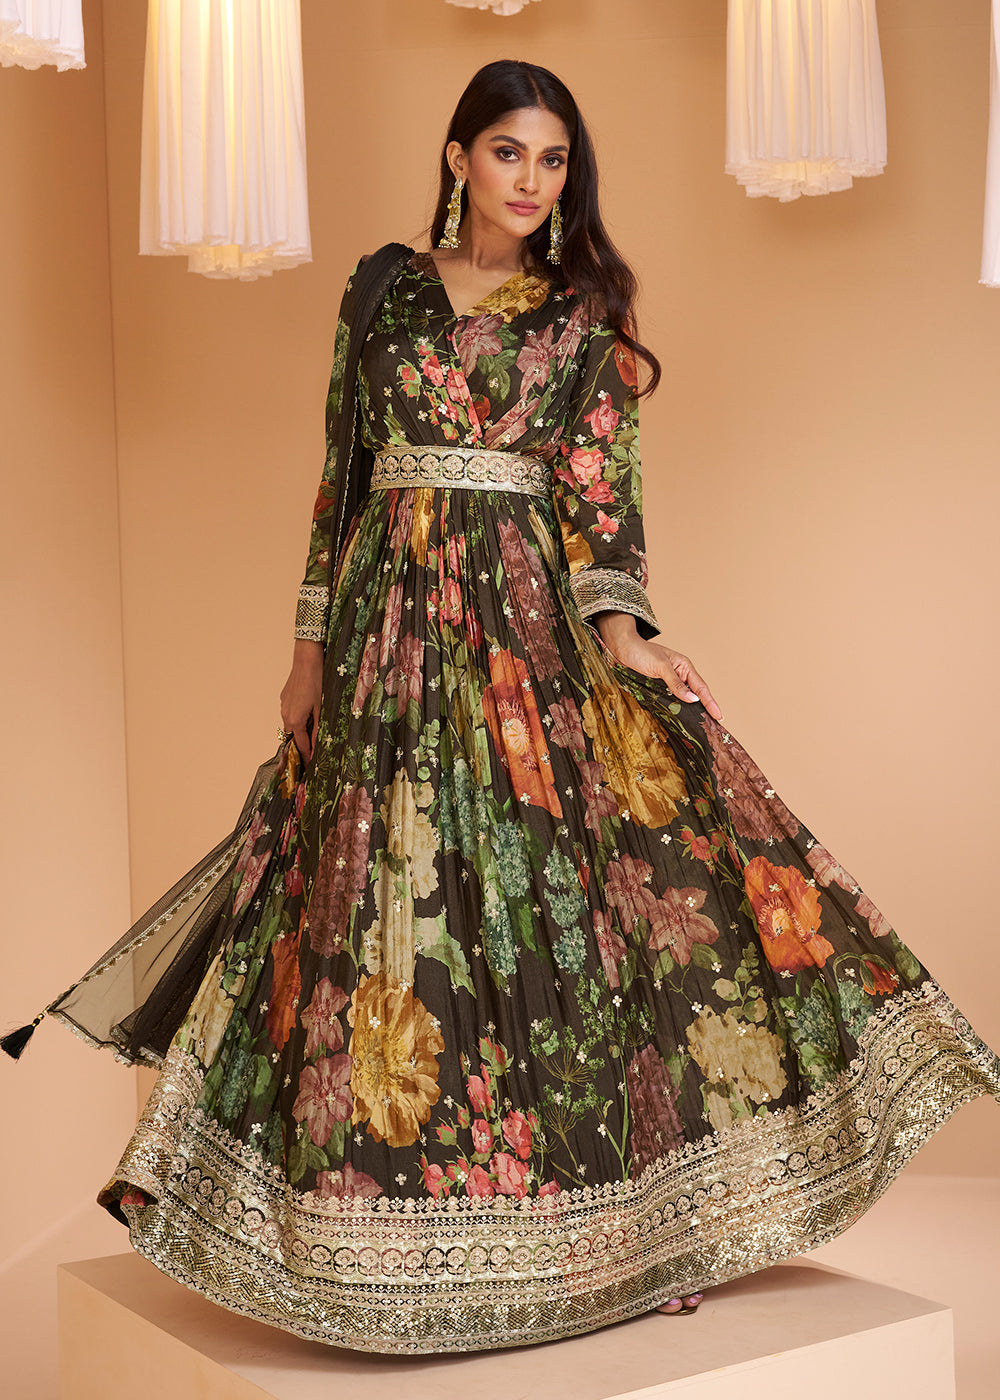 Buy Now Coffee Brown Floral Printed Wedding Festive Anarkali Gown Online in USA, UK, Australia, Canada & Worldwide at Empress Clothing.